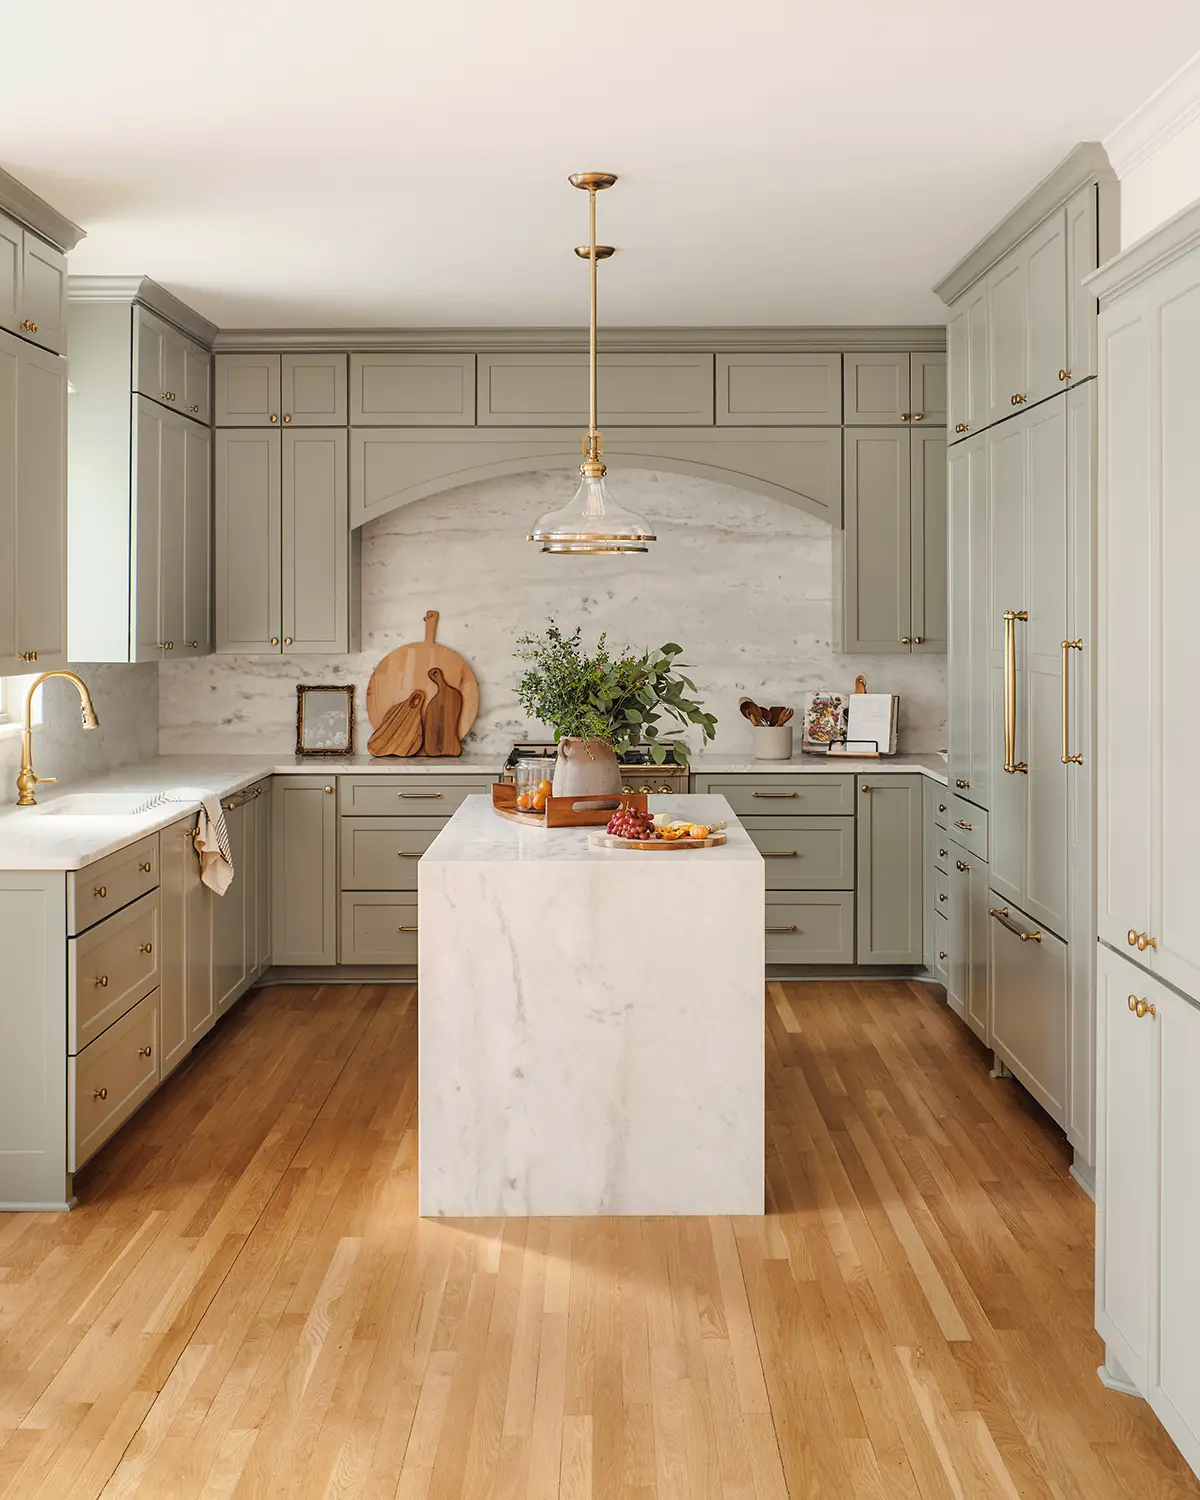 18 Kitchens With Sage Green Cabinets You'll Want to Copy